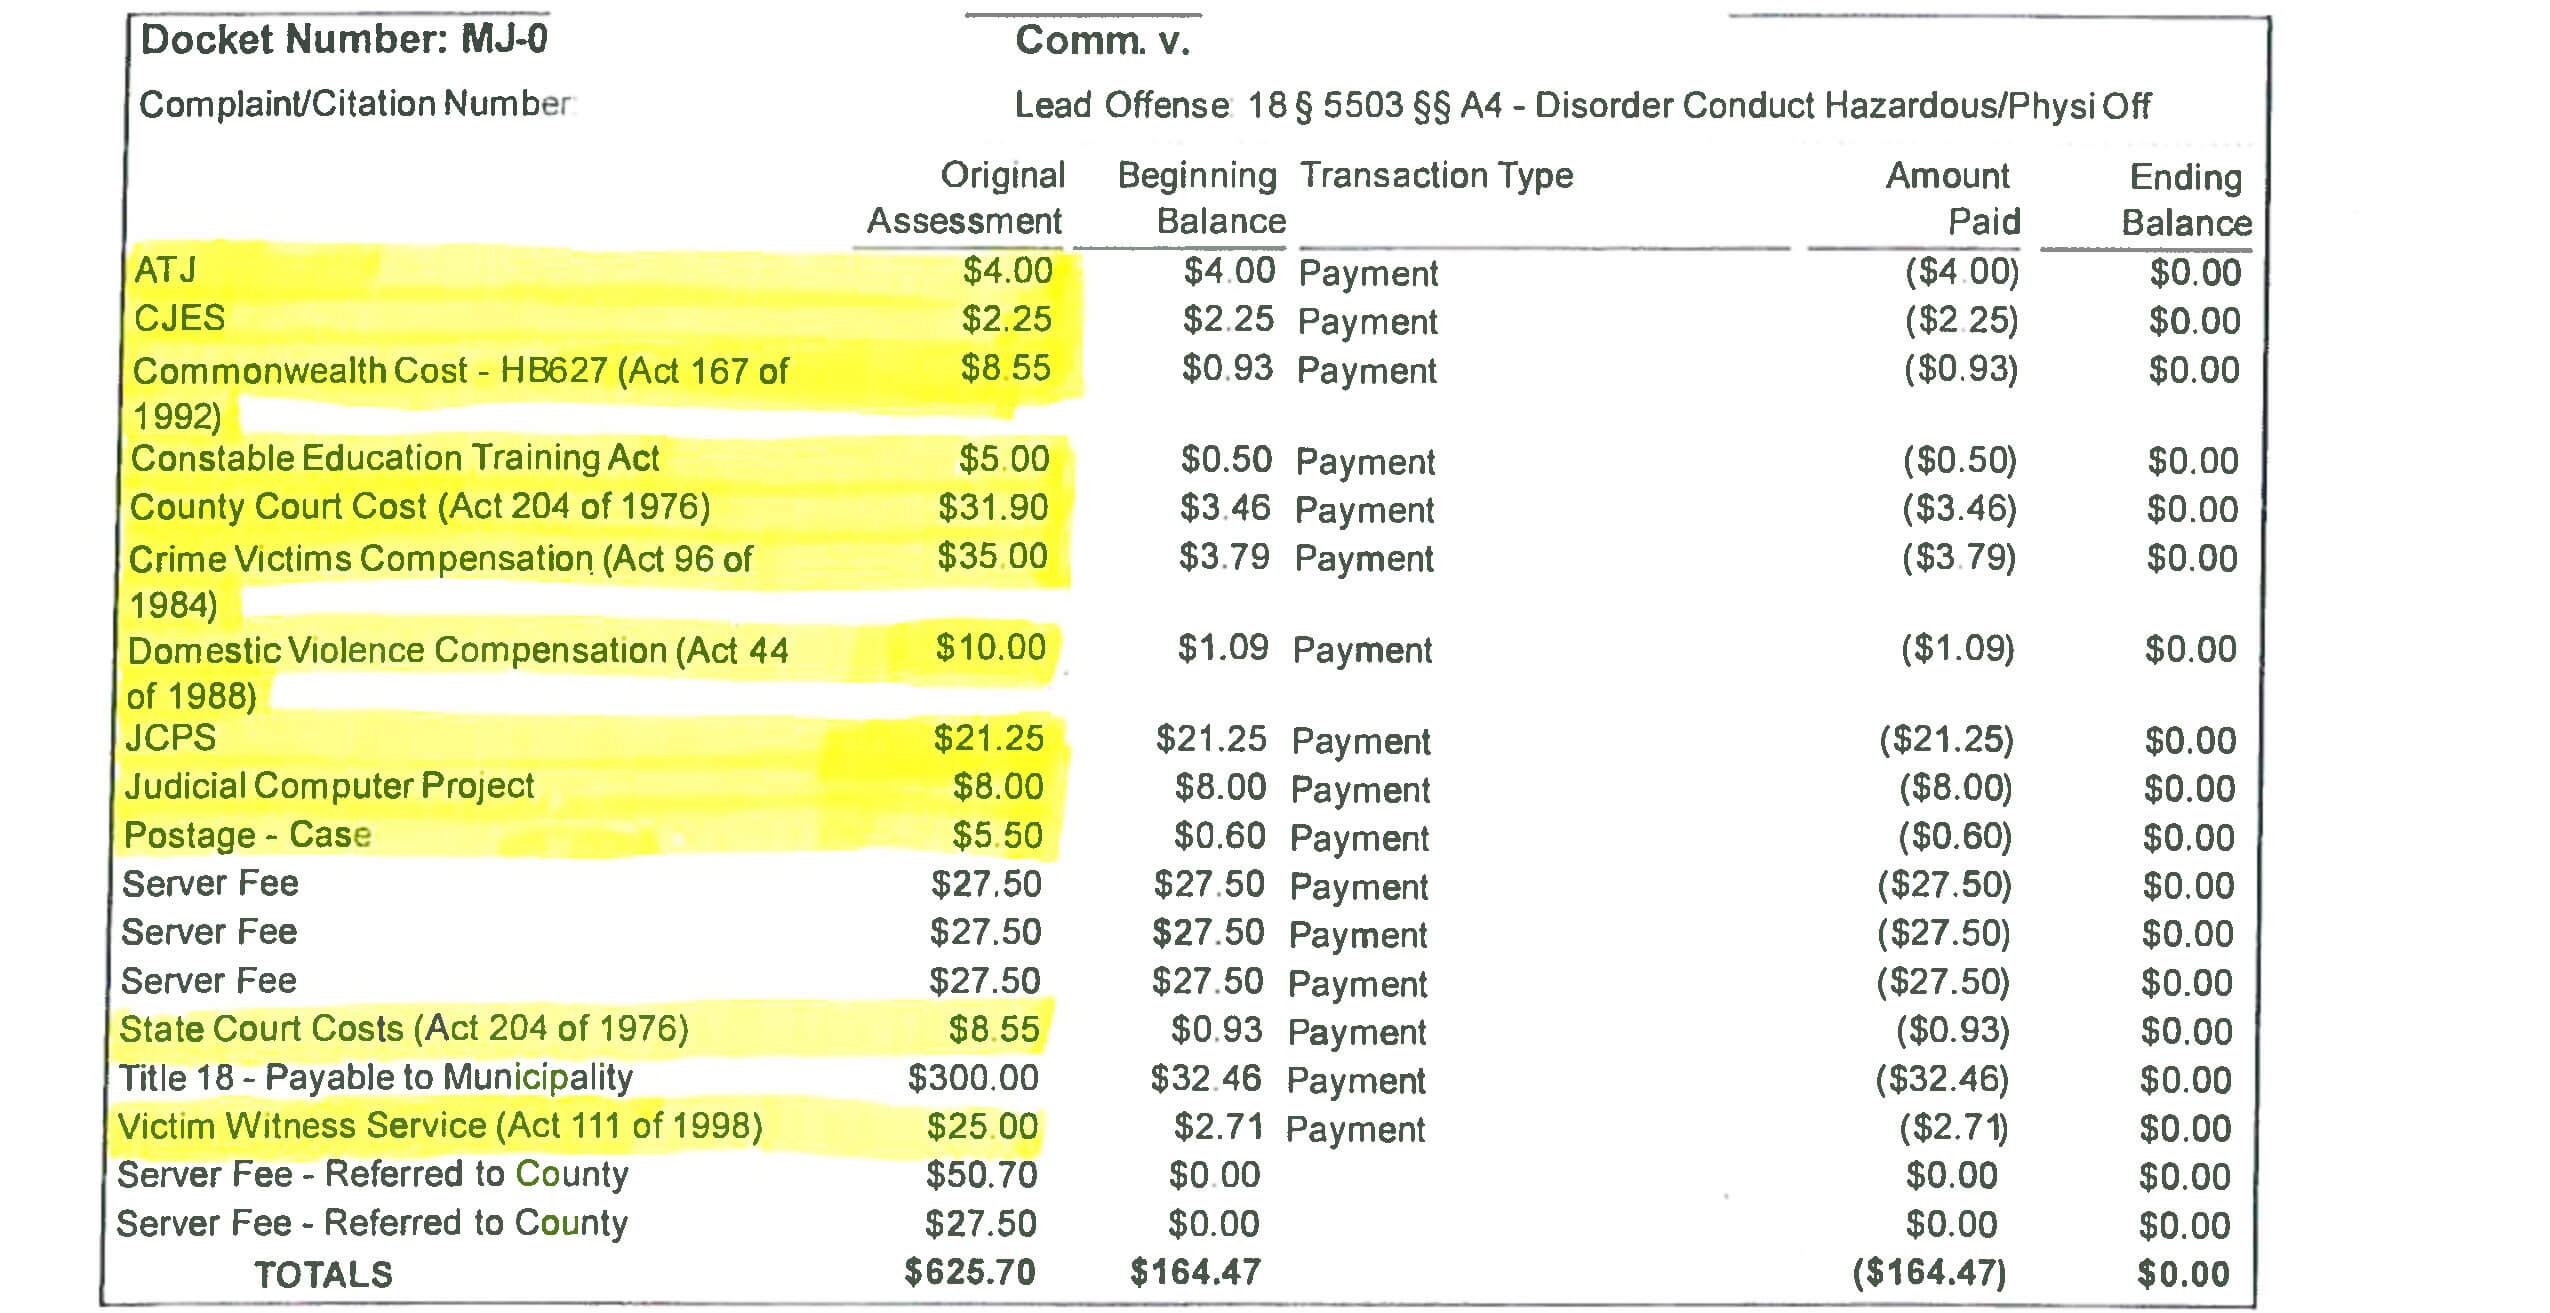 The fees, costs and surcharges on the offense add up to $165…